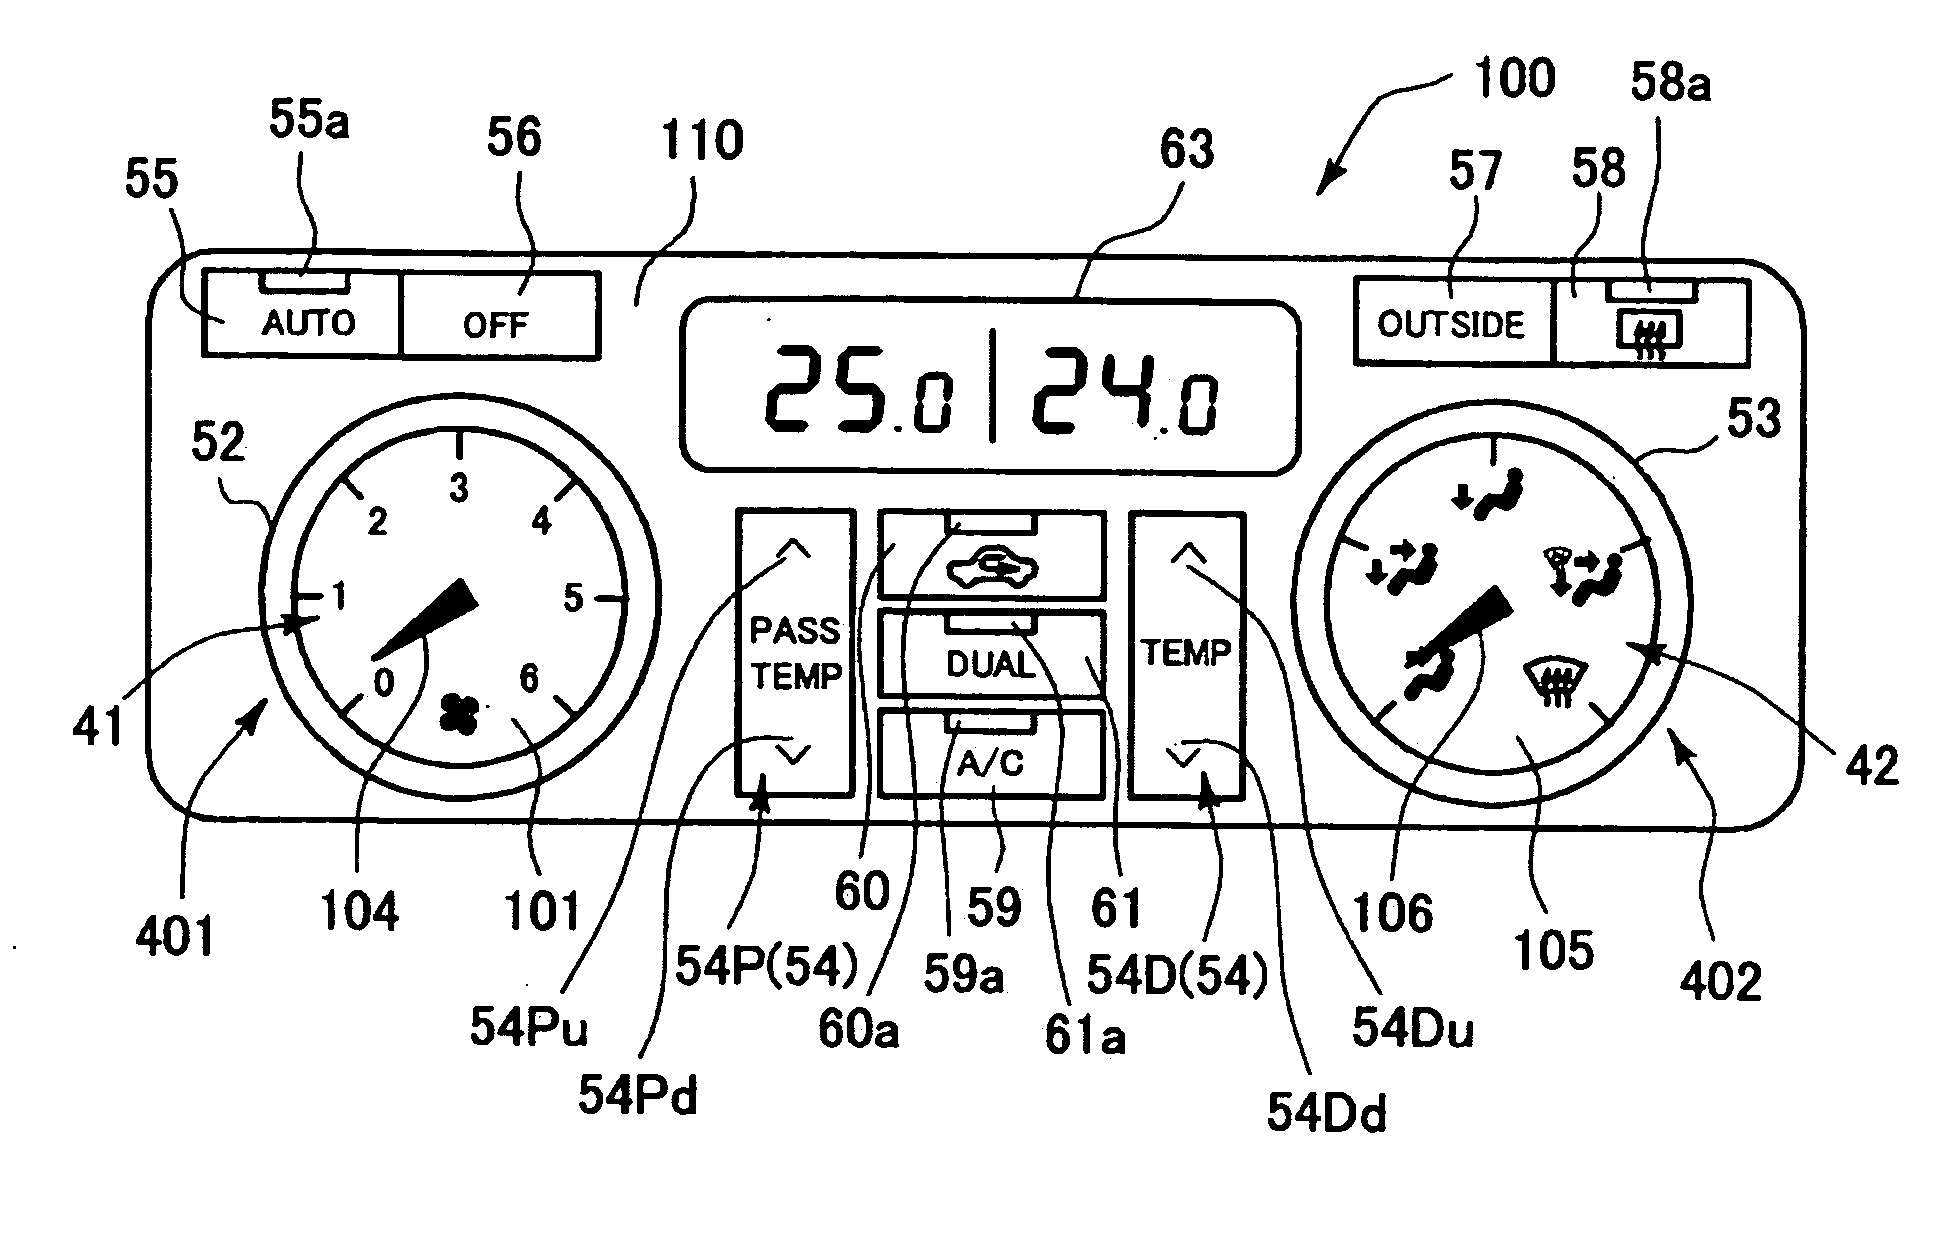 Onboard electronic device operating unit